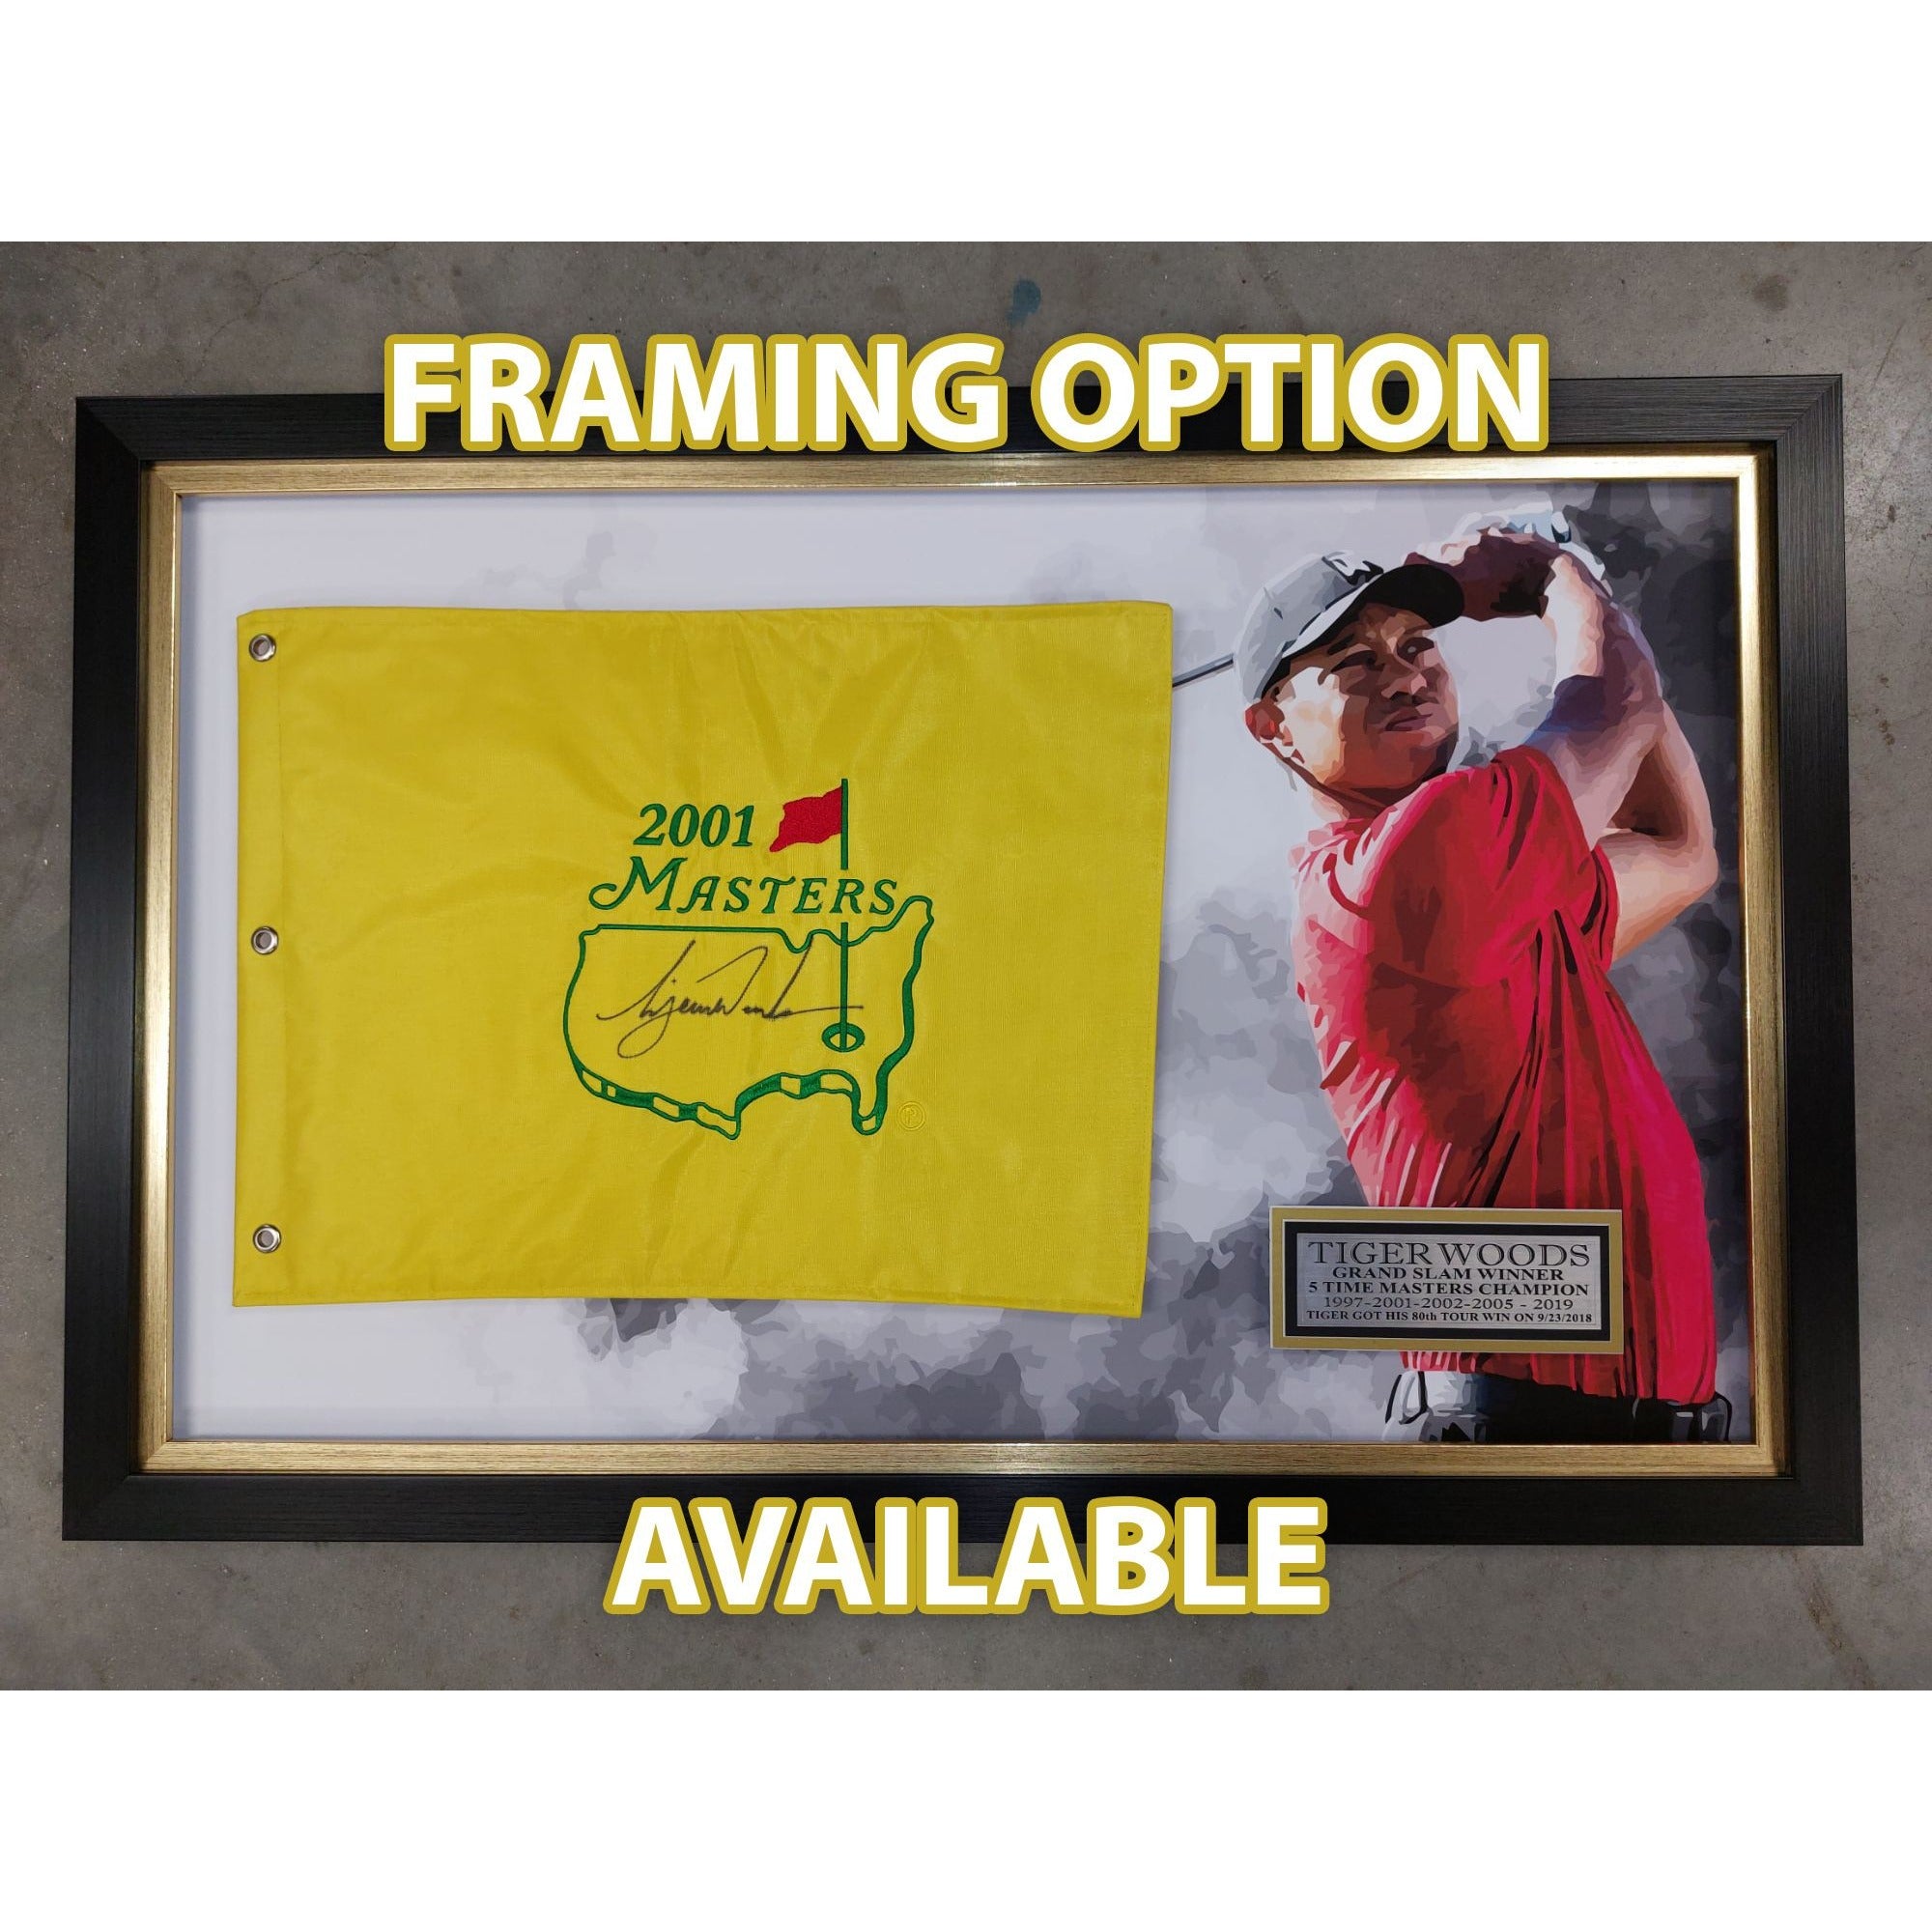 Tiger Woods "To Steve all the best" 2002 Masters Golf pin flag signed with proof